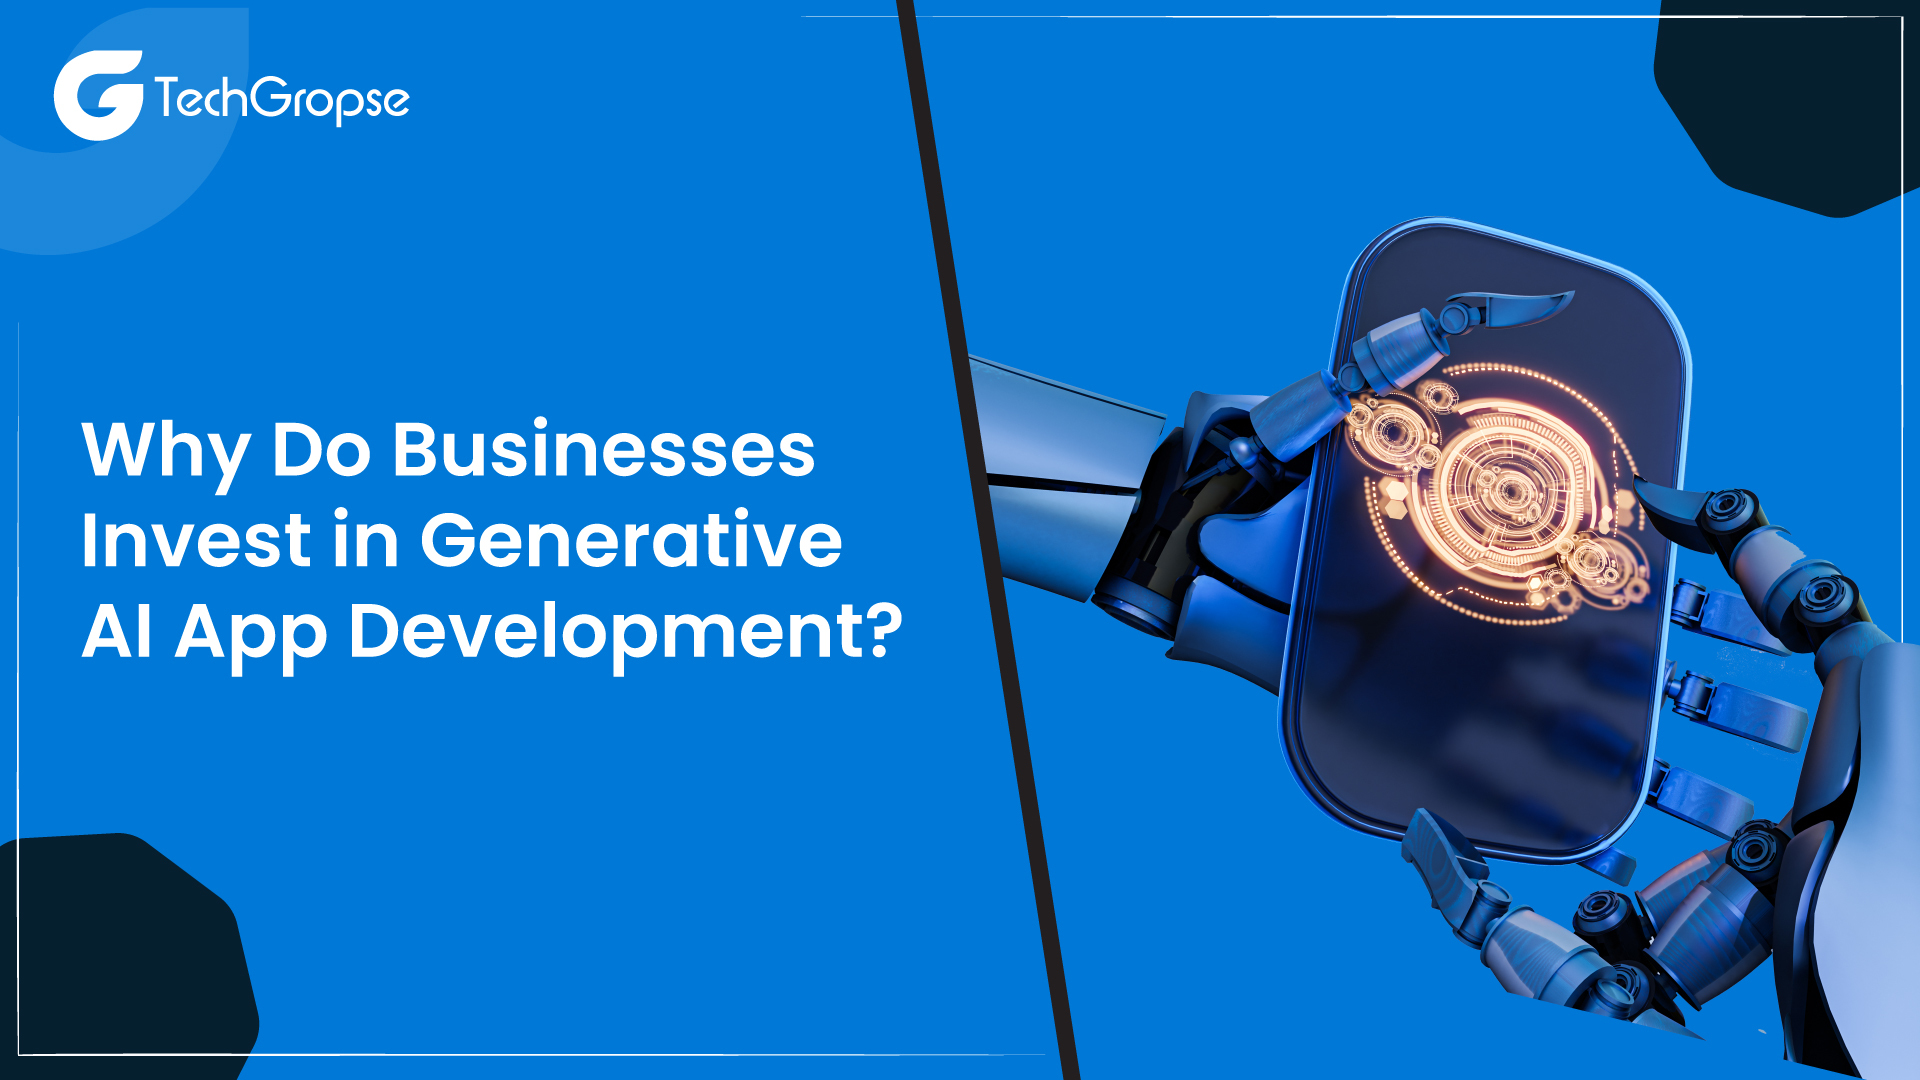 Why Do Businesses Invest in Generative AI App Development?